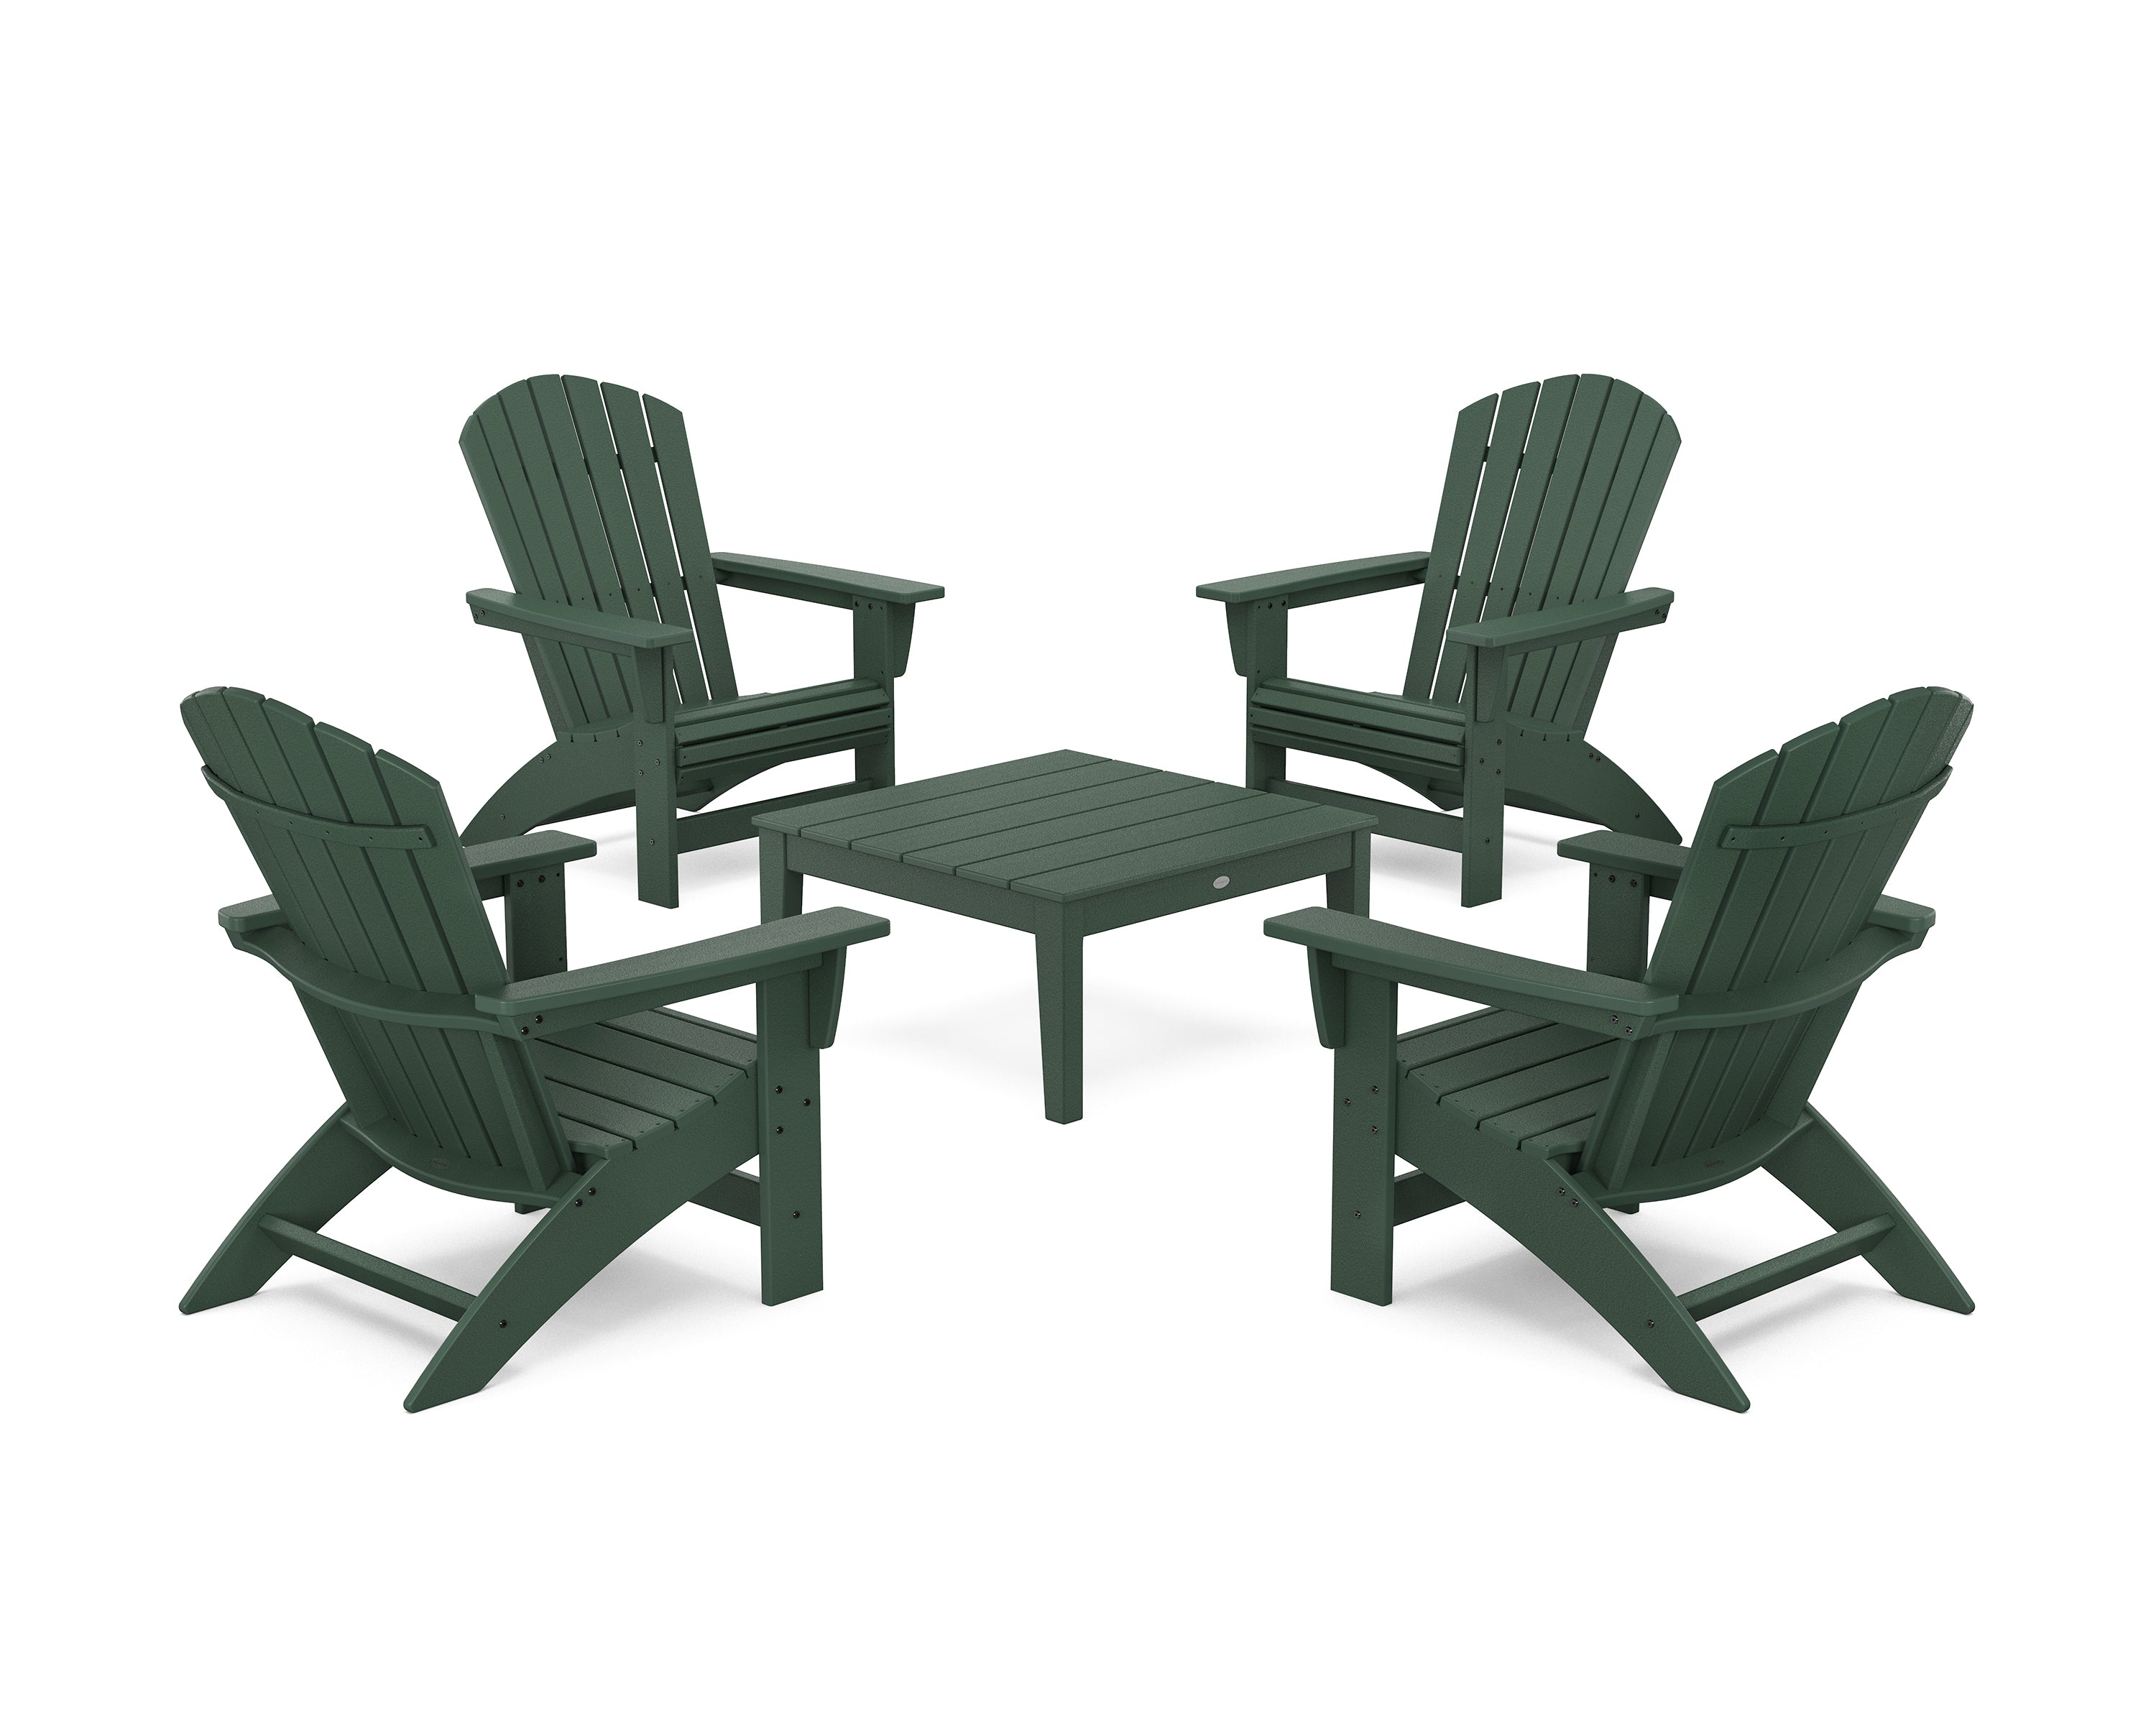 POLYWOOD® 5-Piece Nautical Grand Adirondack Chair Conversation Group in Green